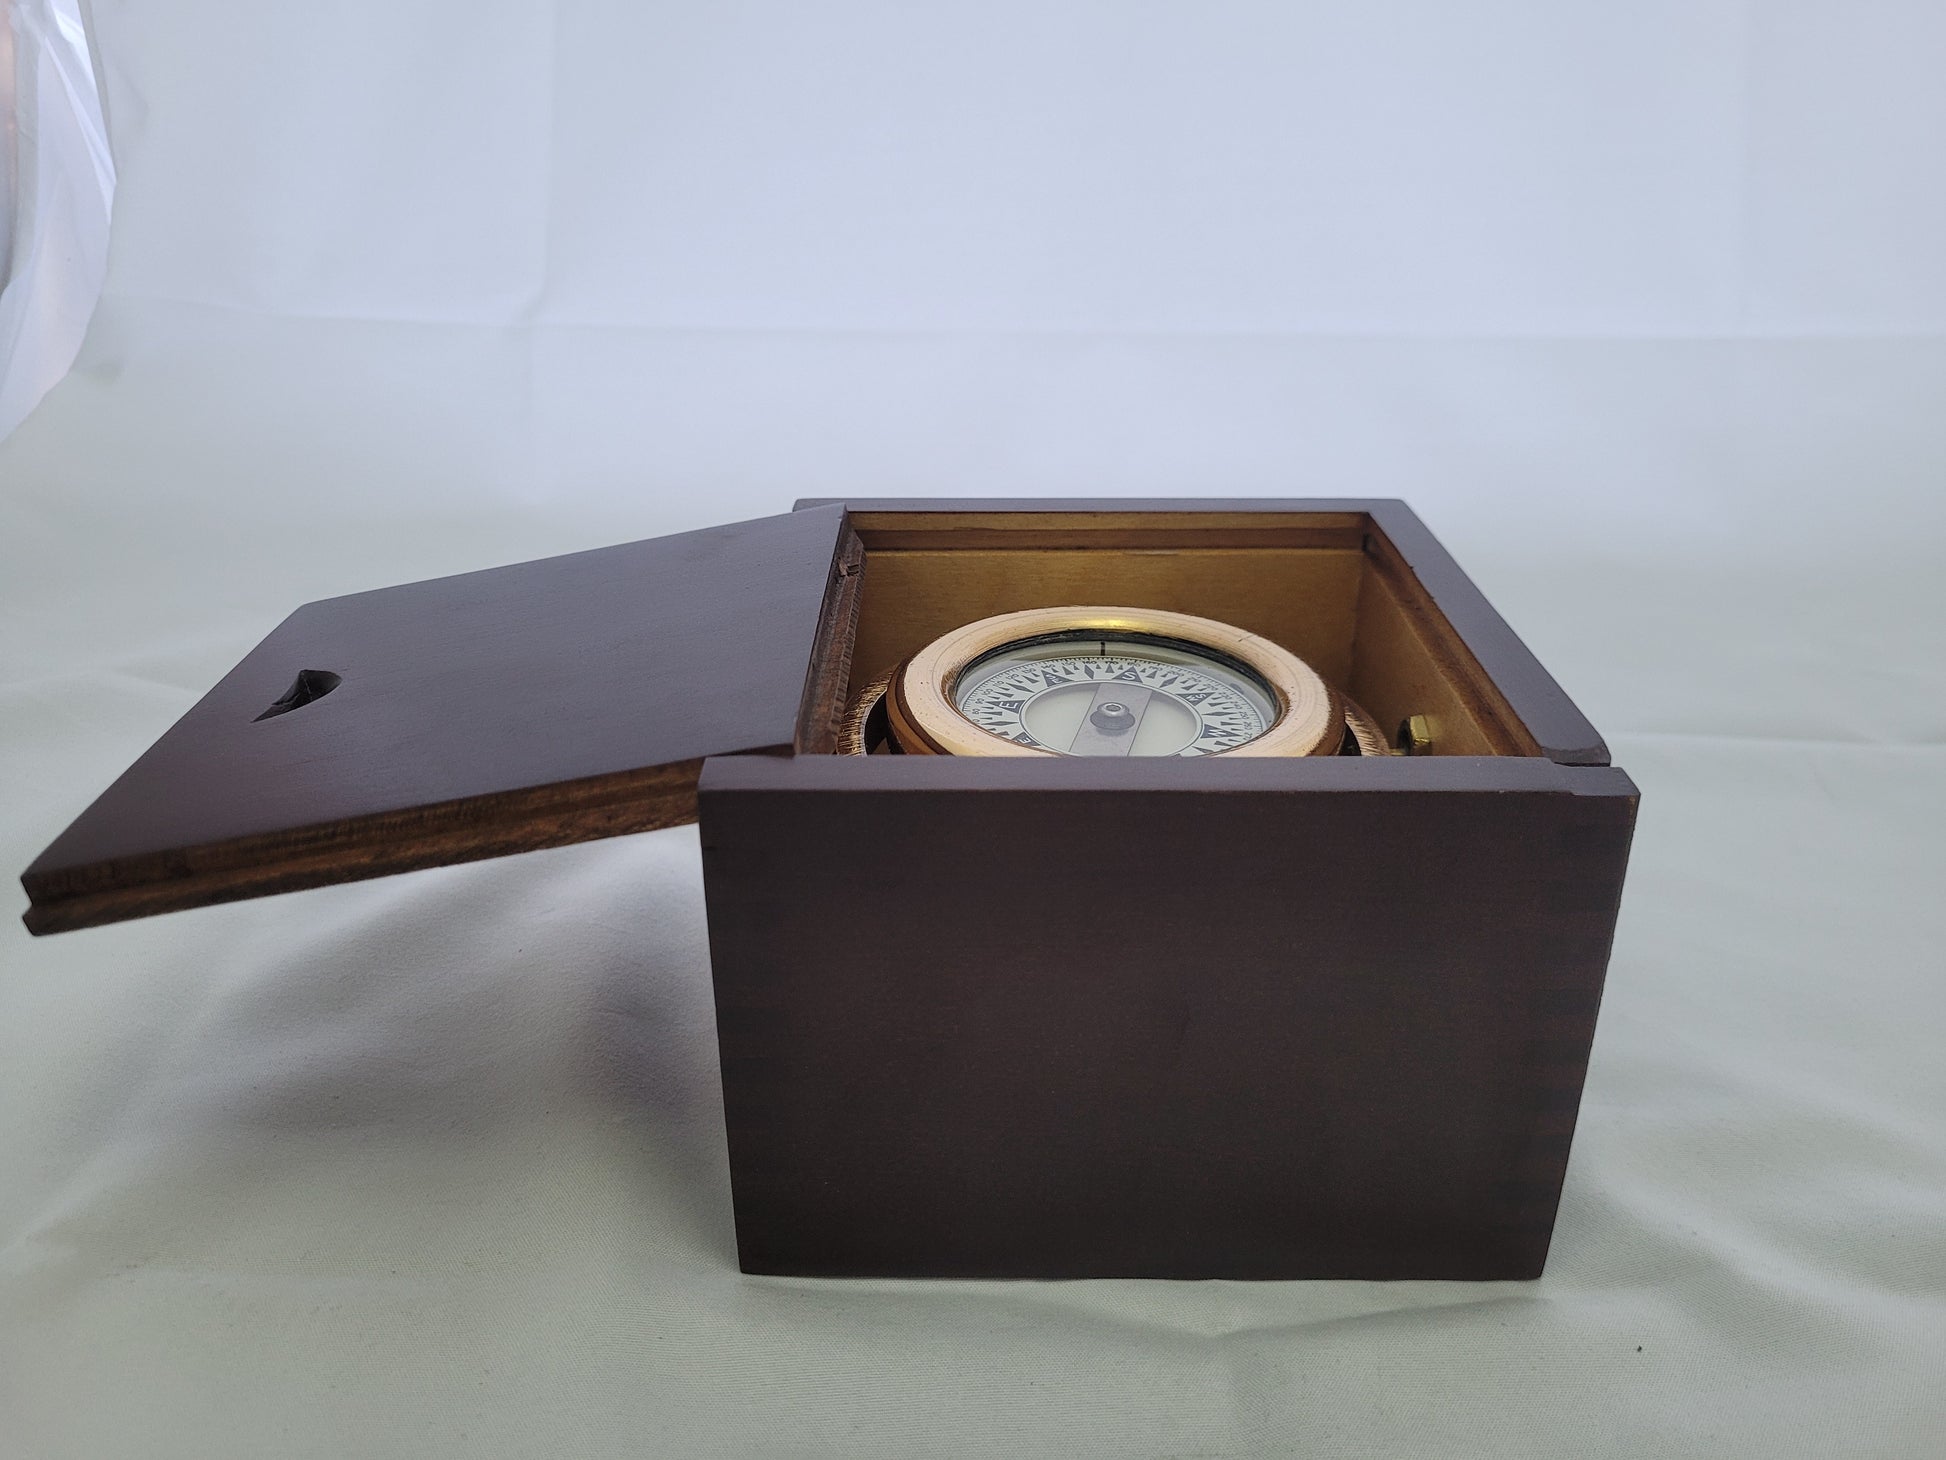 Boxed Boat Compass by Wilcox Crittendon